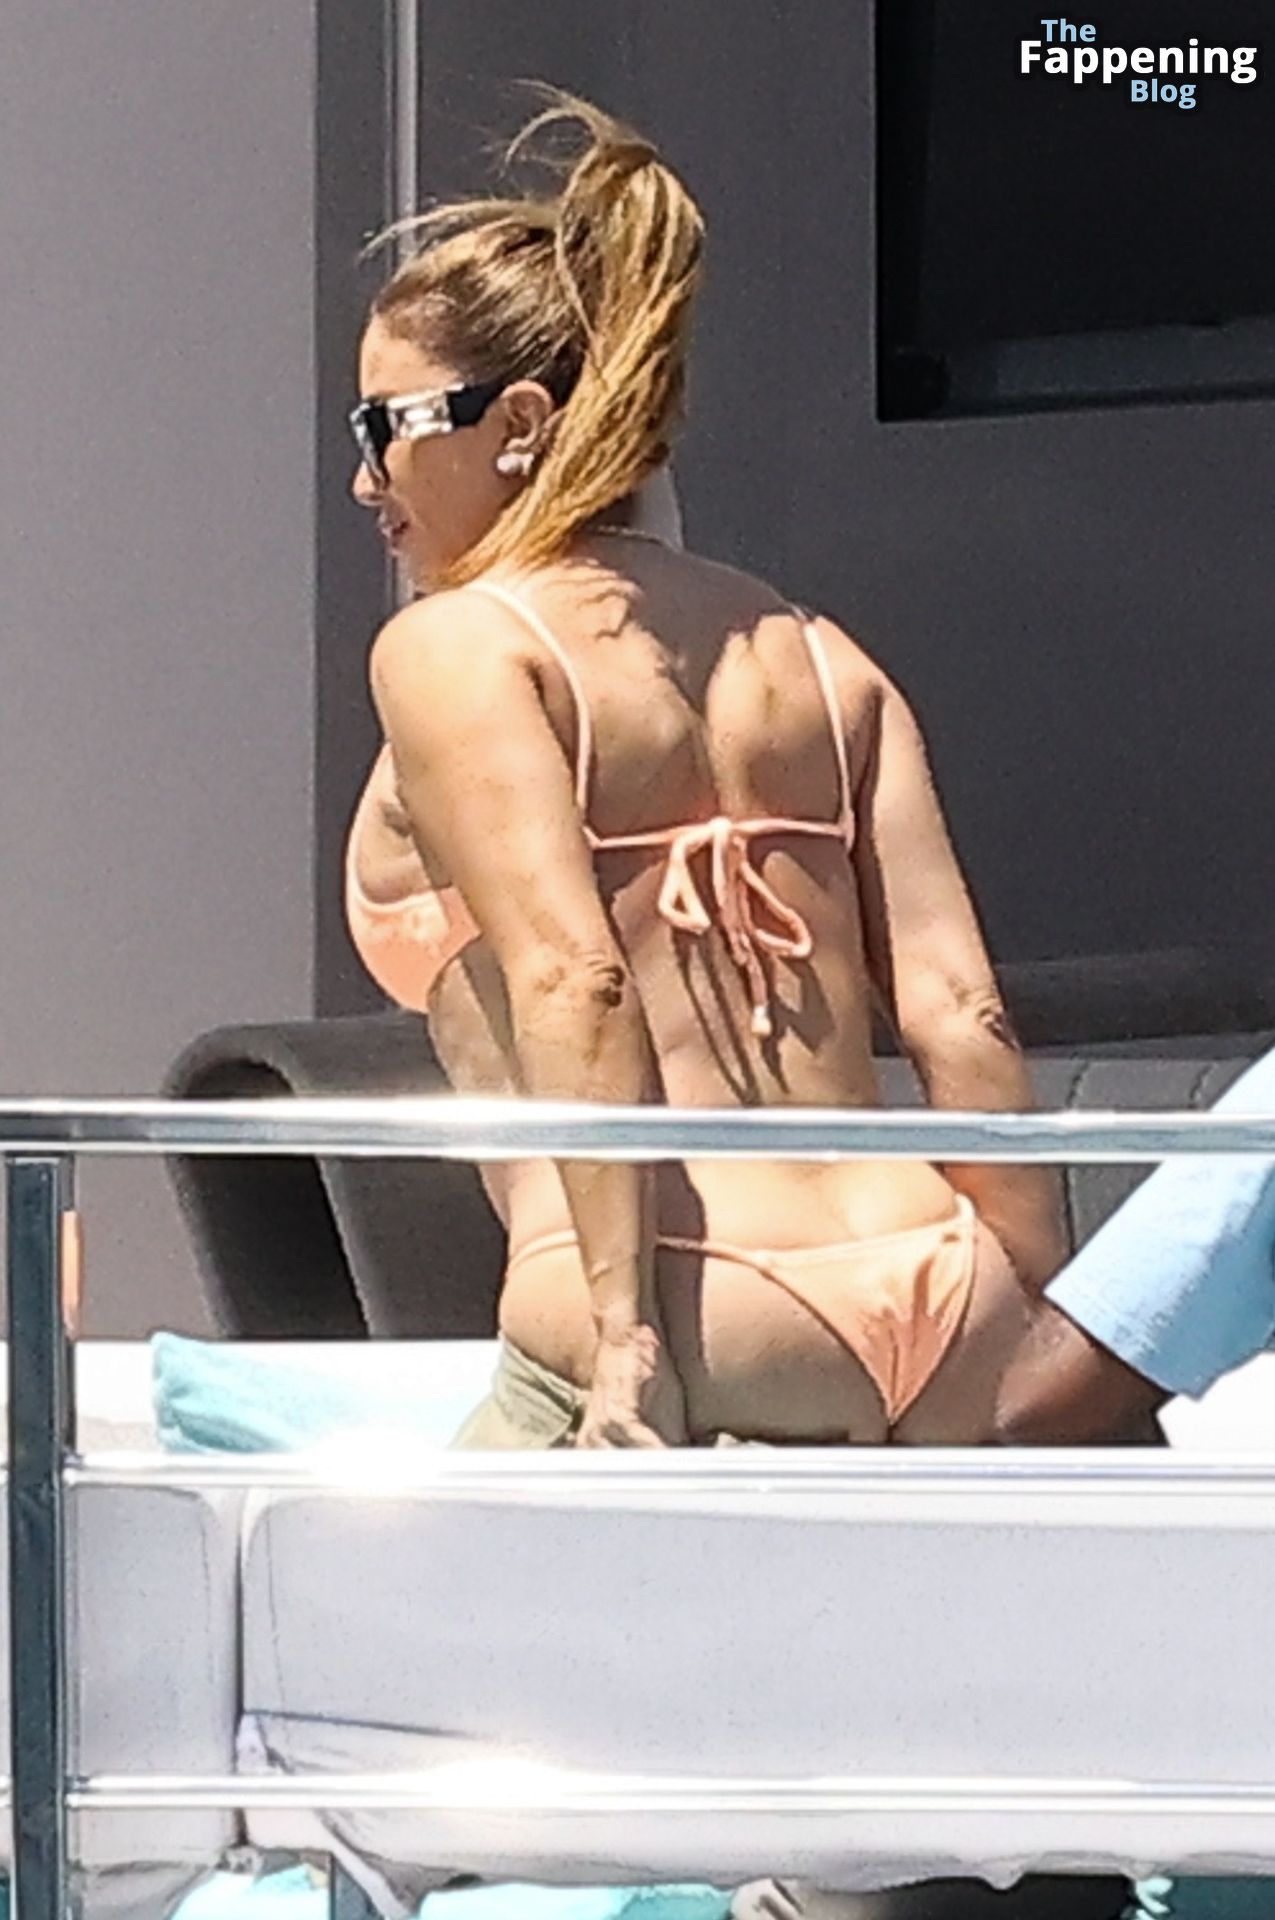 Larsa Pippen Enjoys a Day of Boating with Marcus Jordan.jpg